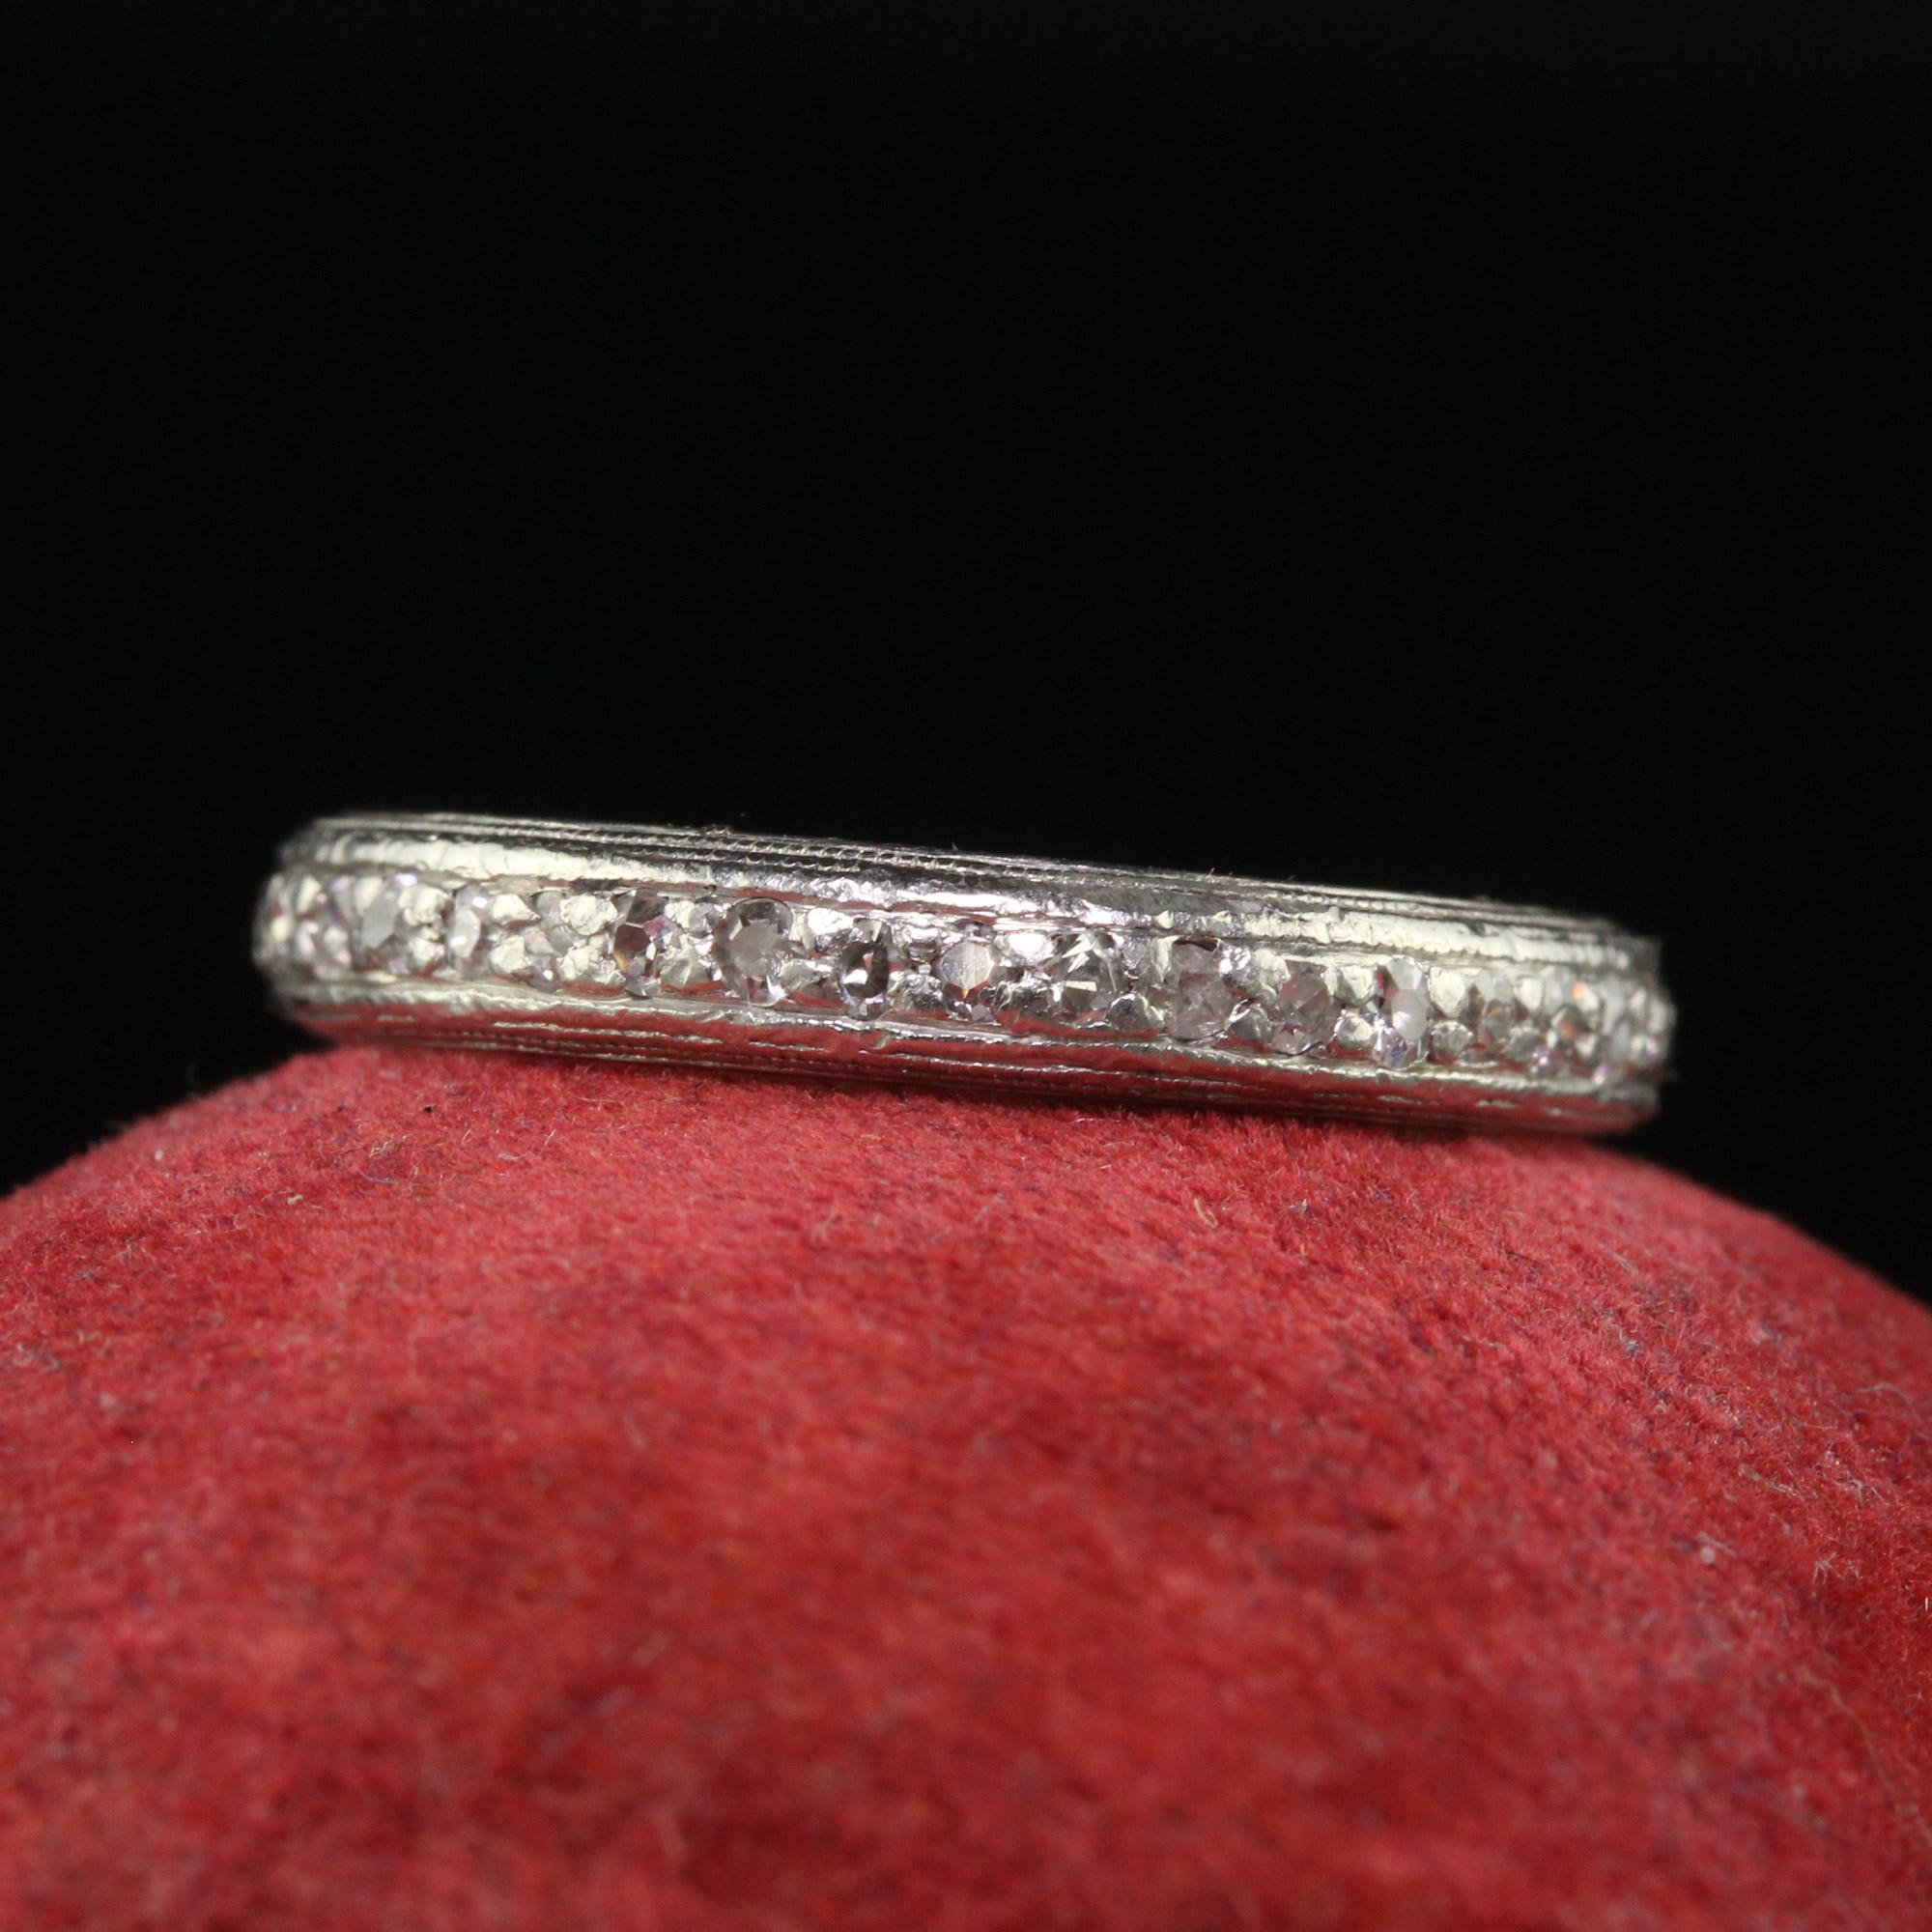 Beautiful Antique Art Deco Platinum Single Cut Diamond Engraved Wedding Band - Size 5 1/2. This beautiful wedding band is crafted in platinum. The ring has single cut diamonds going around the entire ring with a fine miligrain design going around